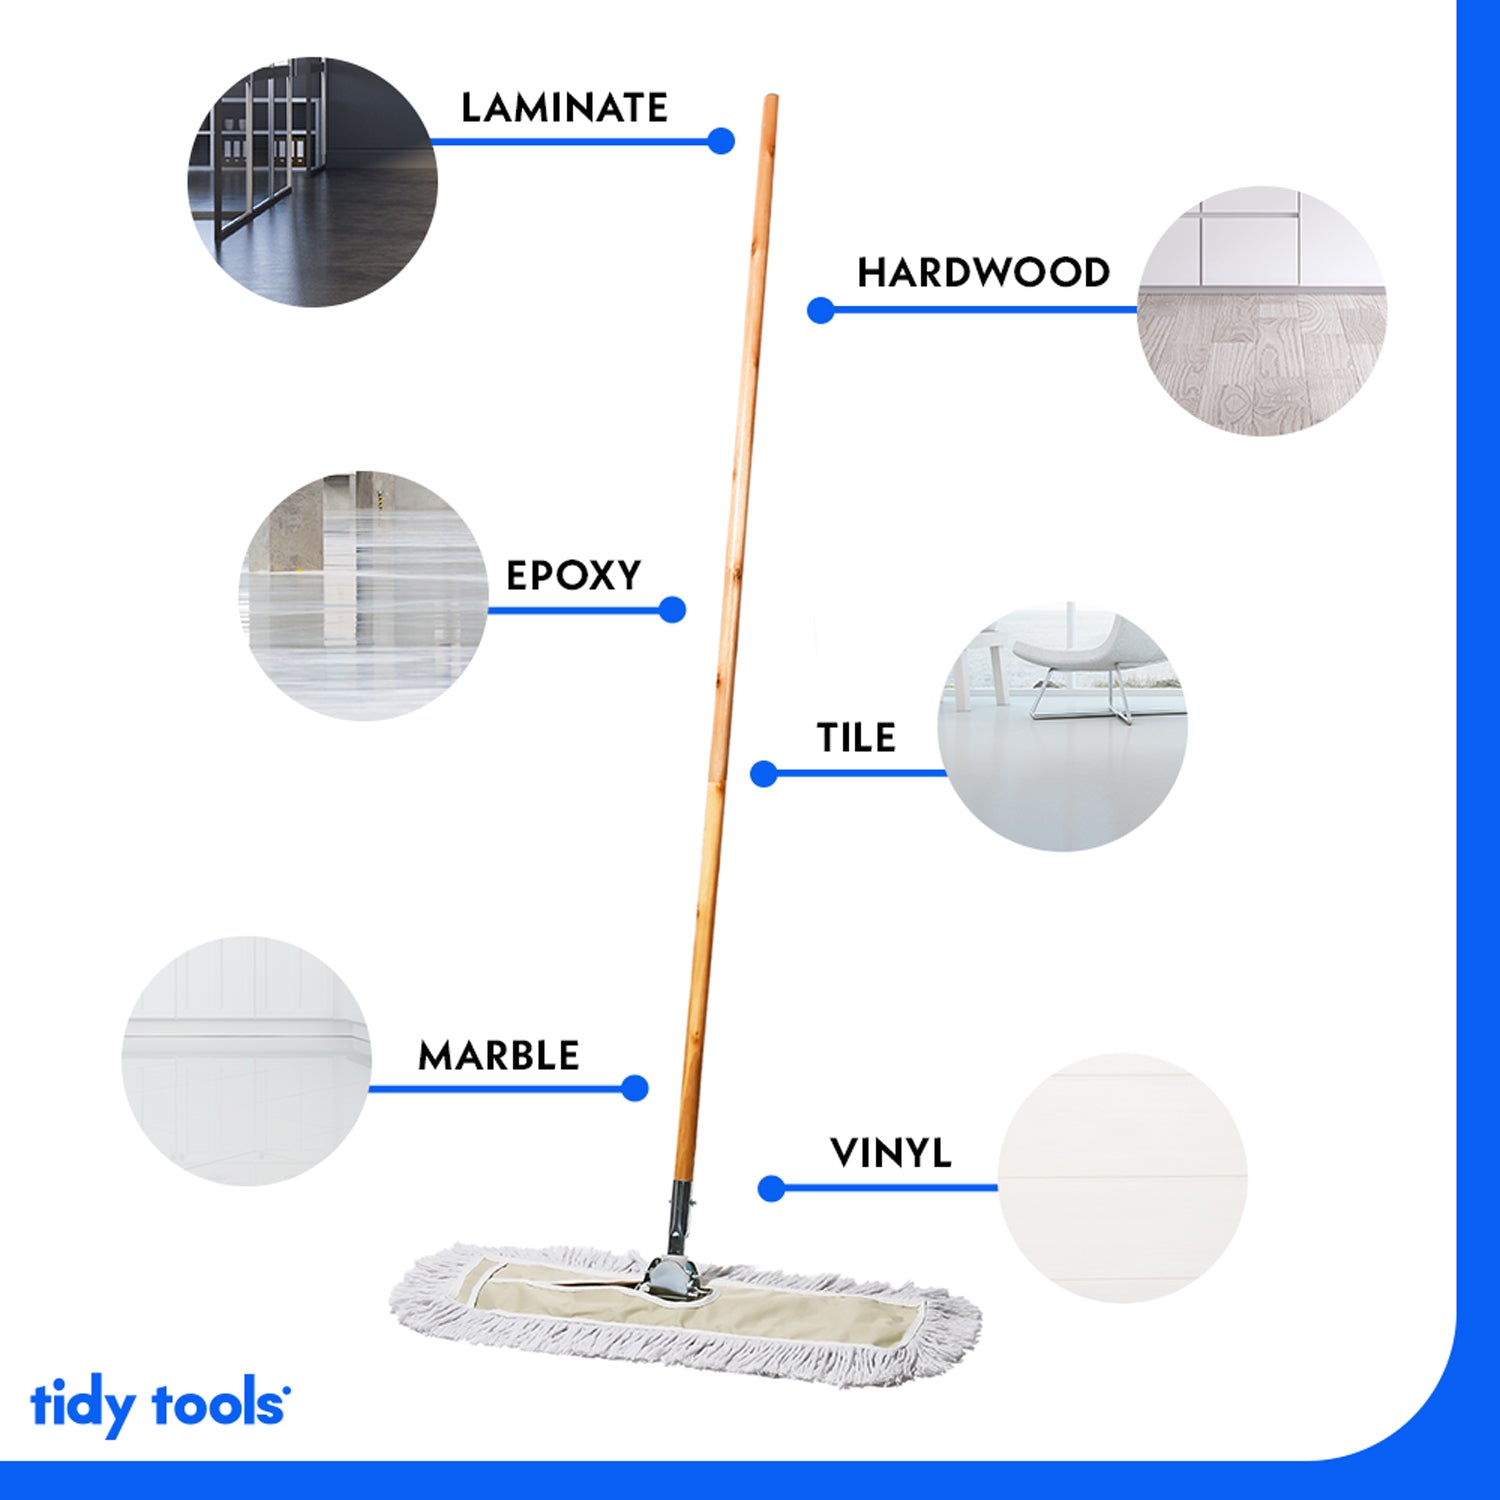 Tidy Tools 30 inch Cotton Dust Mop Wood Handle